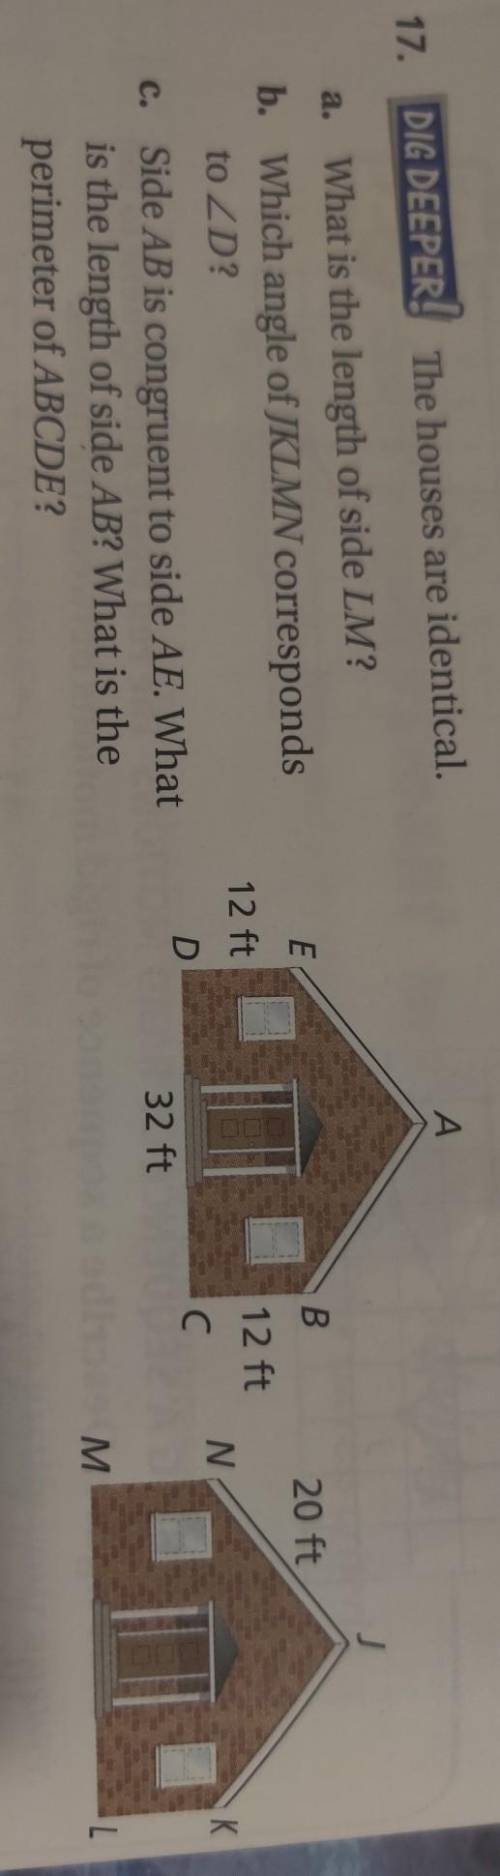 17. DIG DEEPER! The houses are identical.Pls help me answer B and C.(picture above)